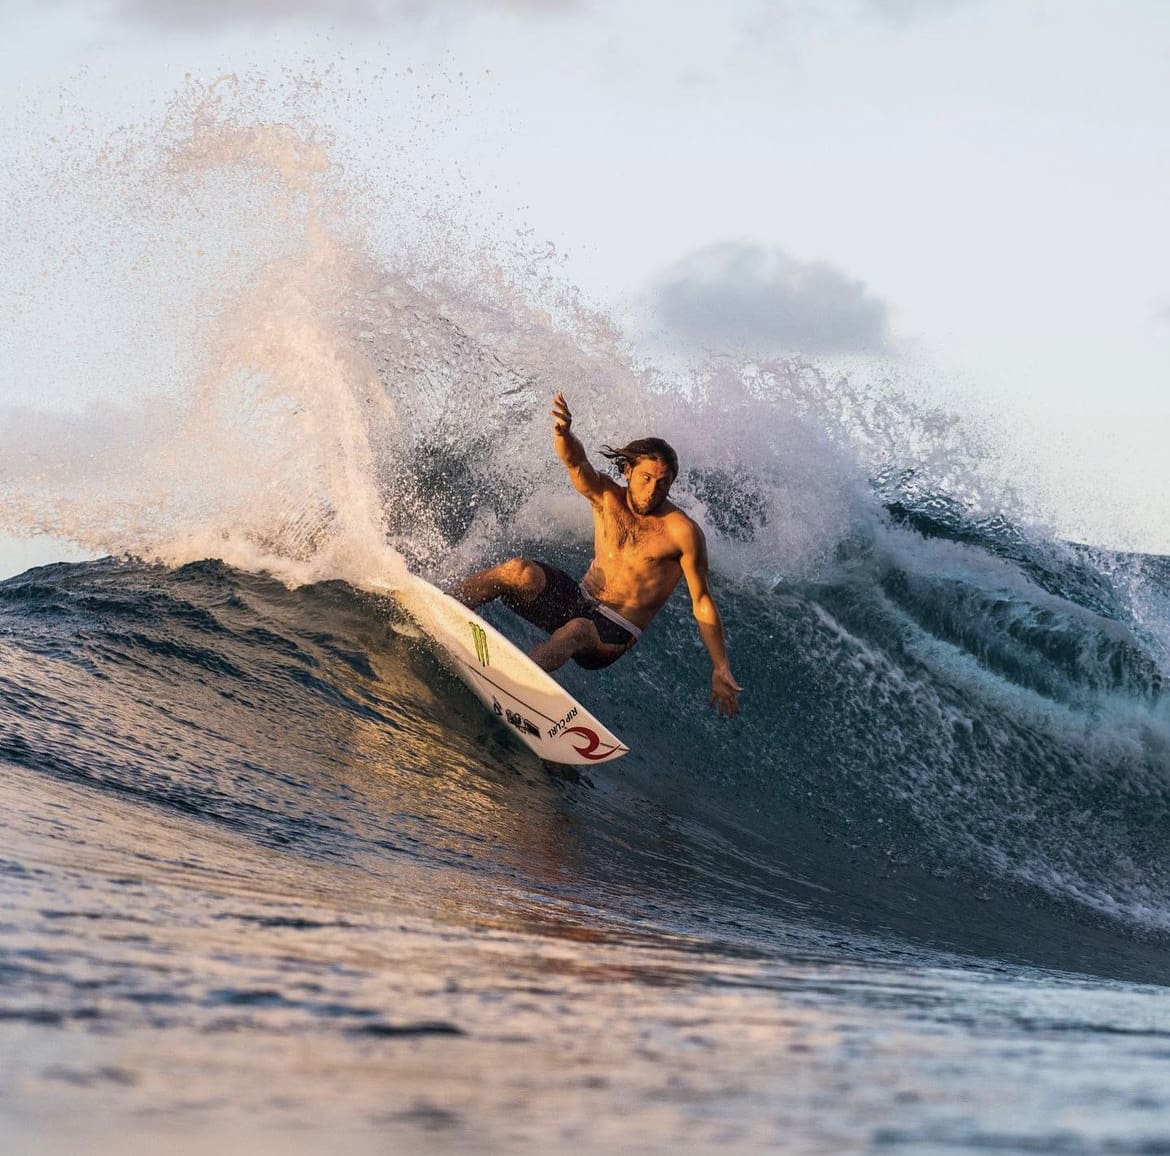 Riding the Waves of Pipeline, a thrill like no other